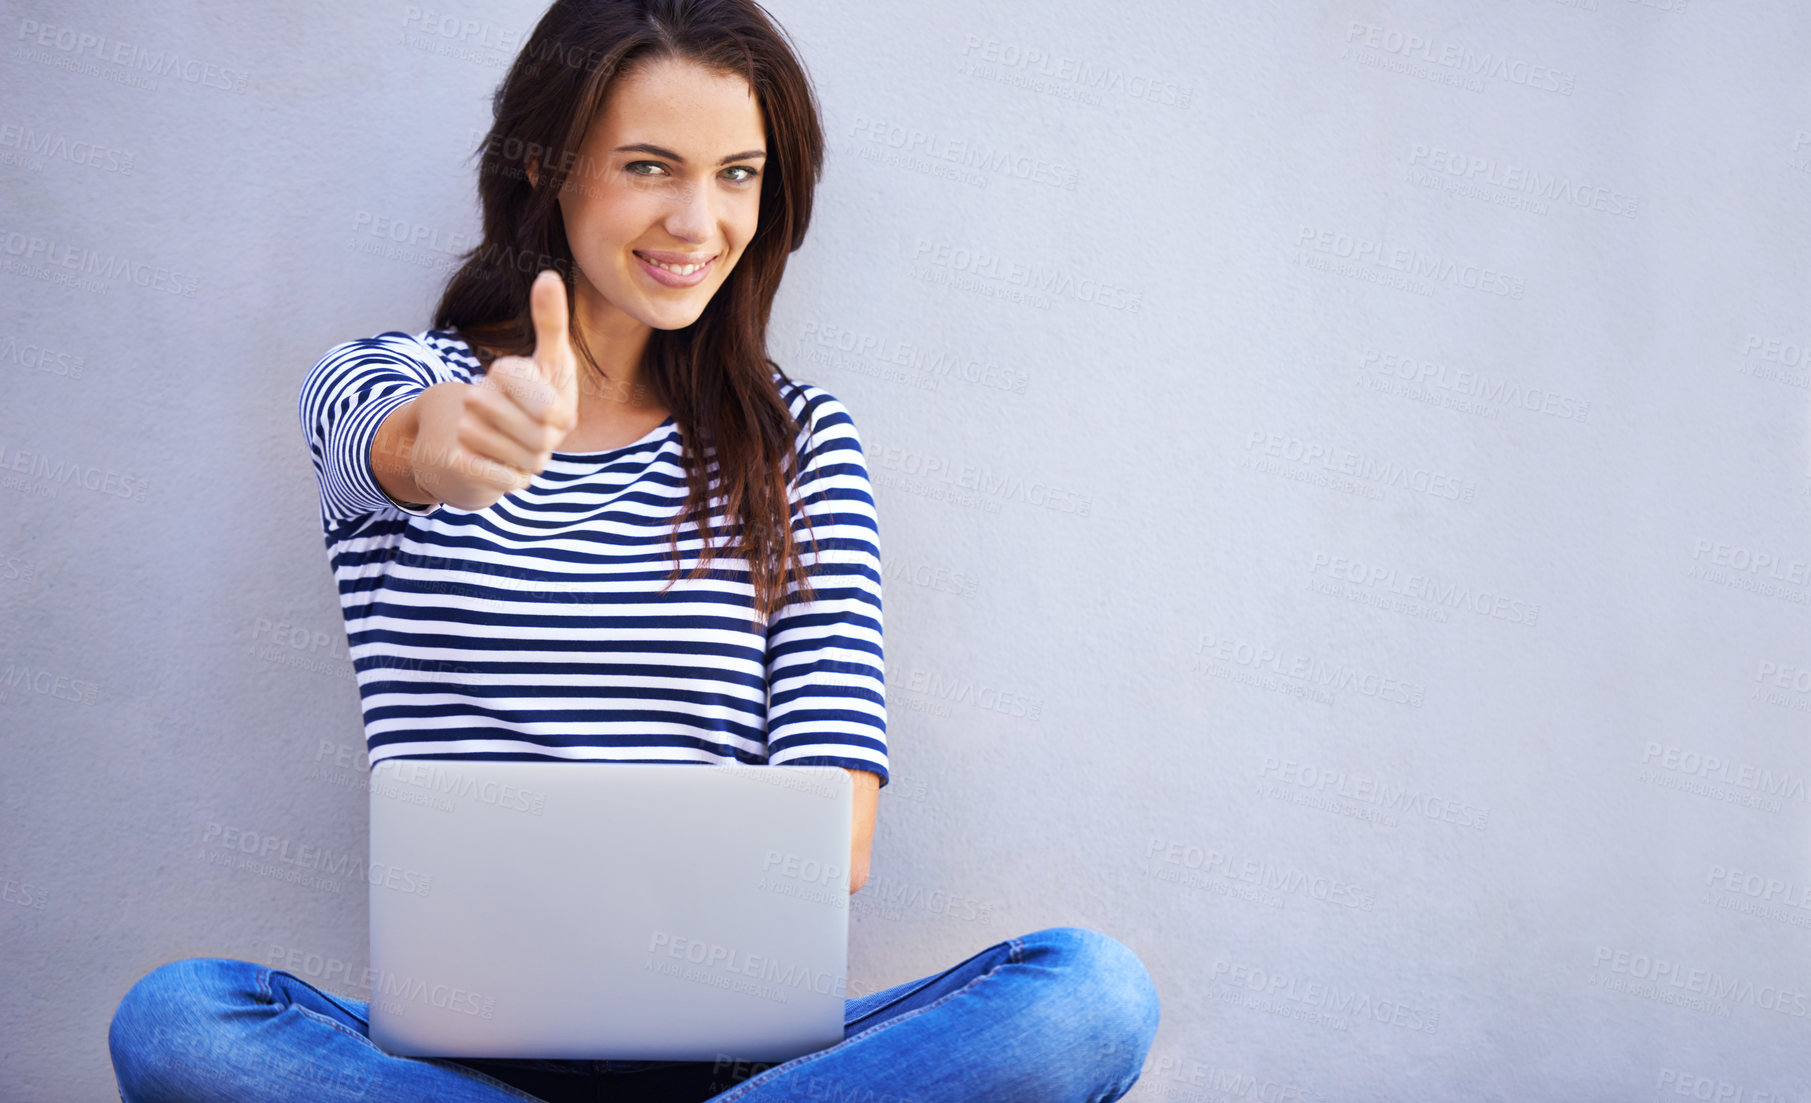 Buy stock photo An attractive young woman showing the thumbs up sign while sitting with her laptop